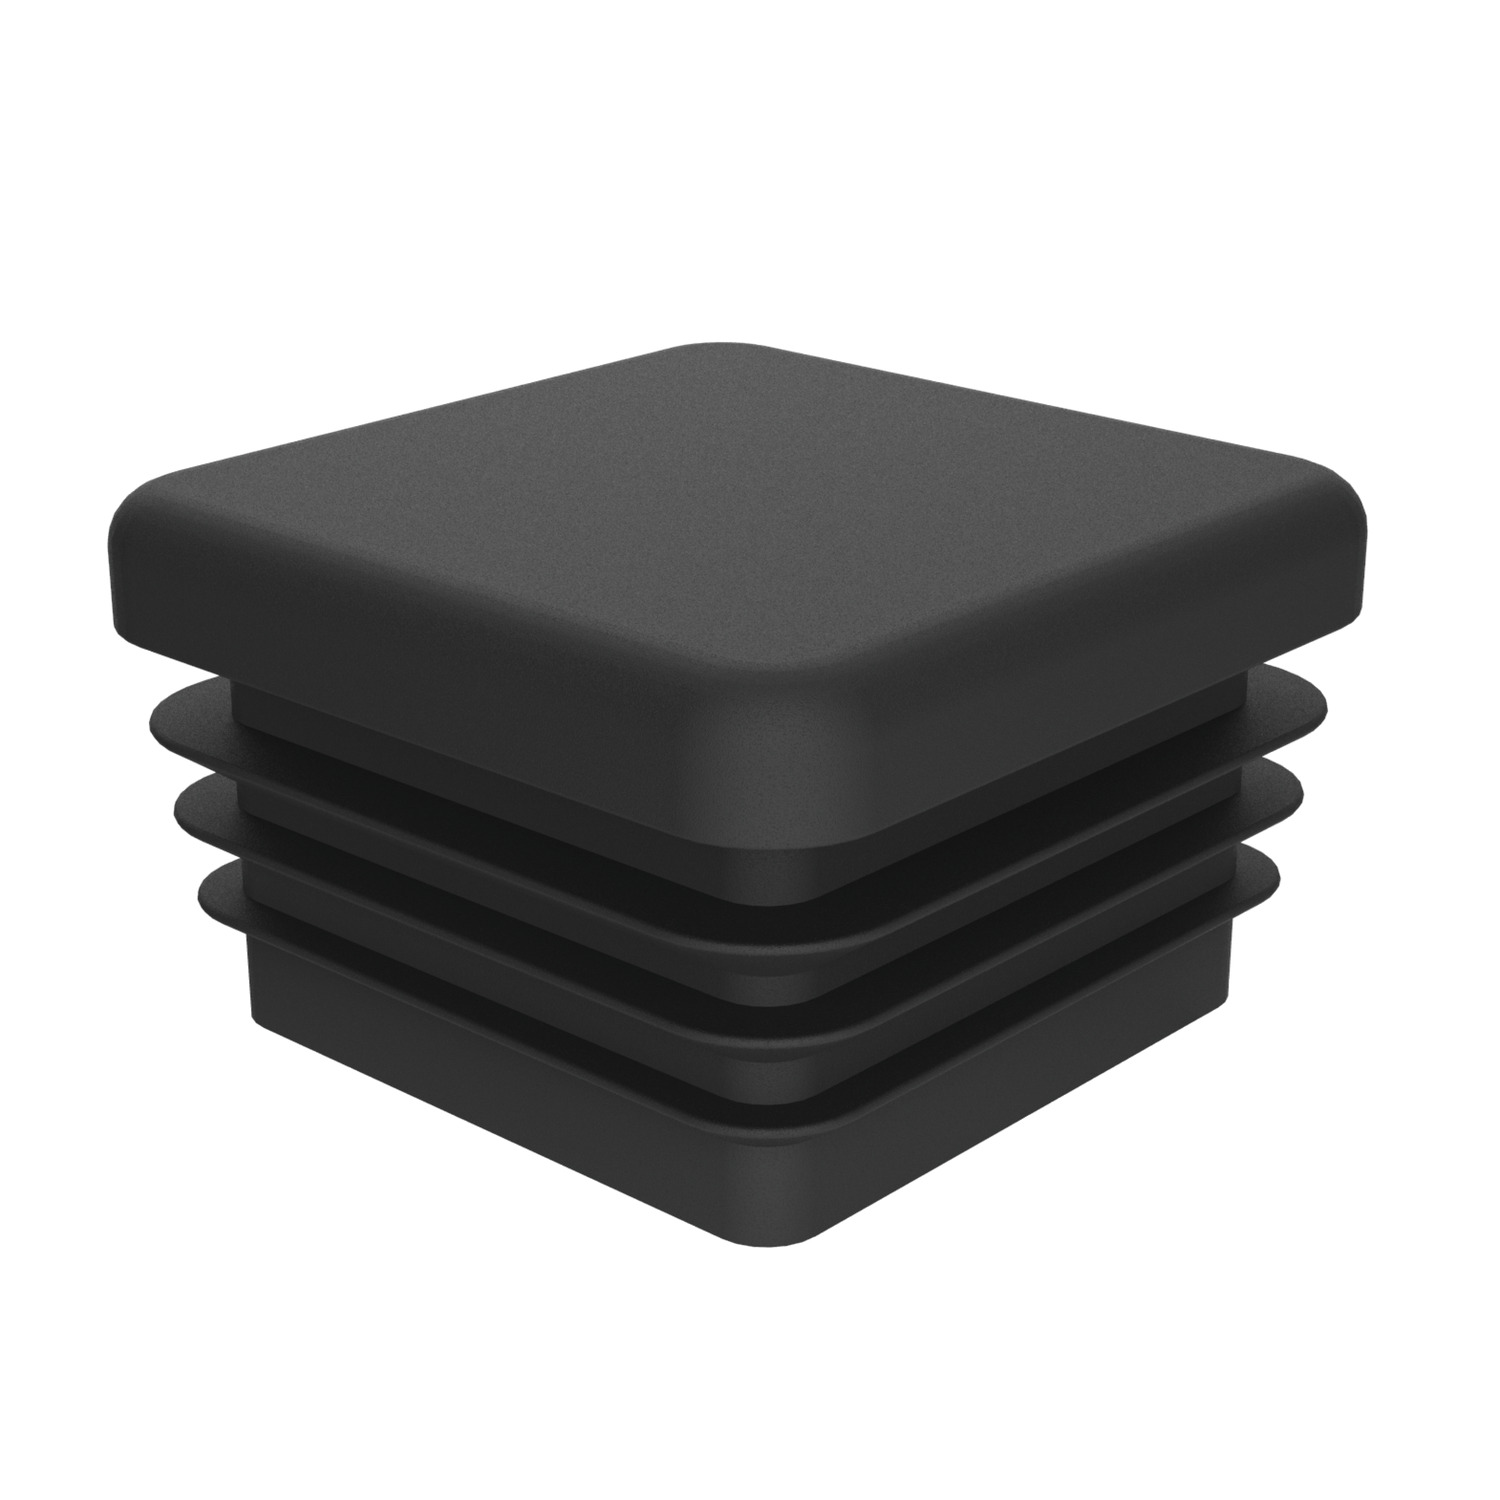 P1988.025-25-0 External Tube Diameter 25X25 Inserts - Square - Ribbed. Supplied In Multiples Of 50 Sold In Multiples Of 50